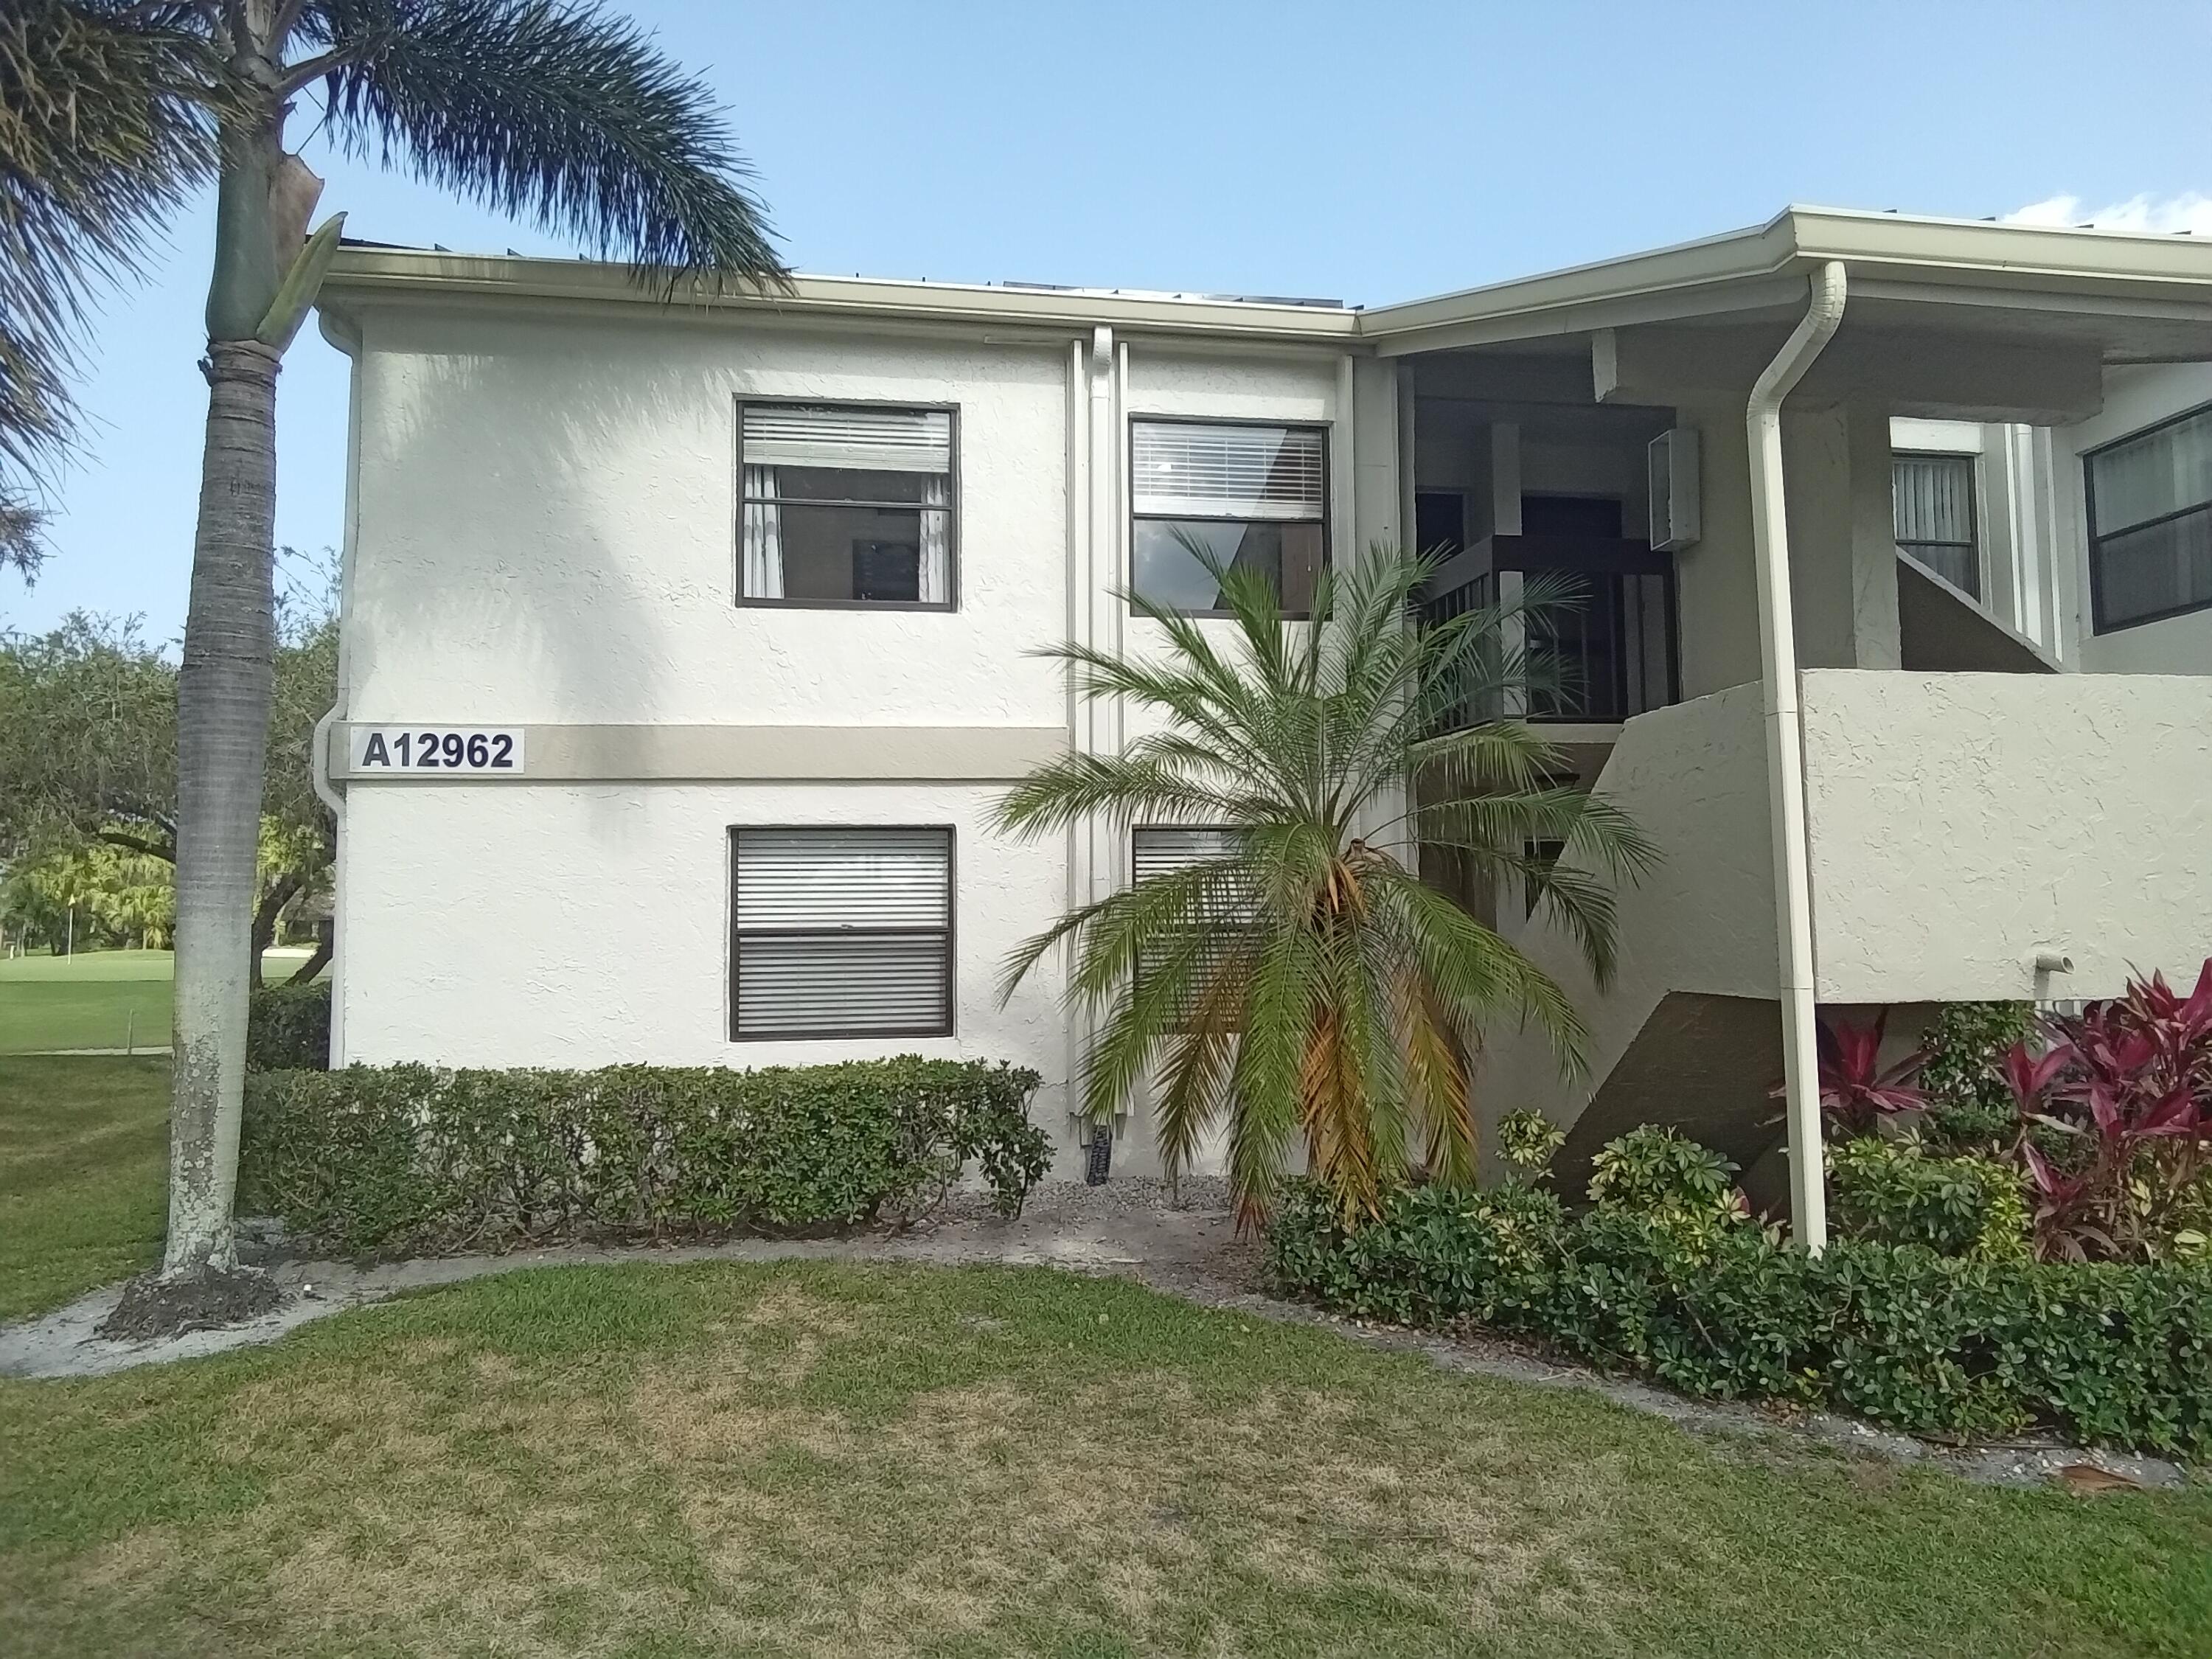 Property for Sale at 12962 Briarlake Drive 201, Palm Beach Gardens, Palm Beach County, Florida - Bedrooms: 2 
Bathrooms: 2  - $275,000